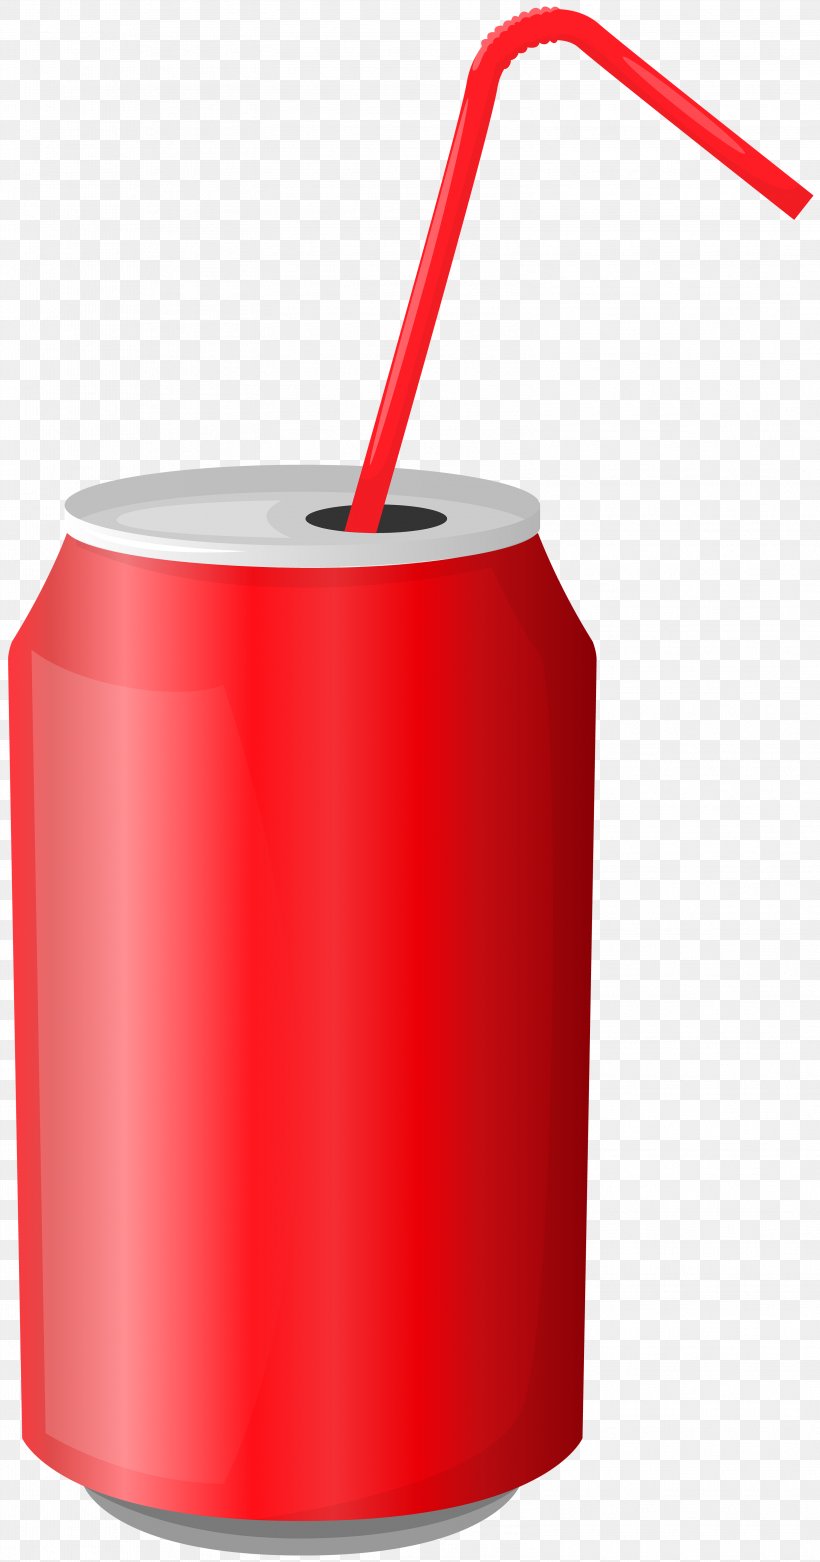 Fizzy Drinks Beverage Can Cola Clip Art, PNG, 3148x6000px, Fizzy Drinks, Beverage Can, Birthday, Bottle, Cola Download Free